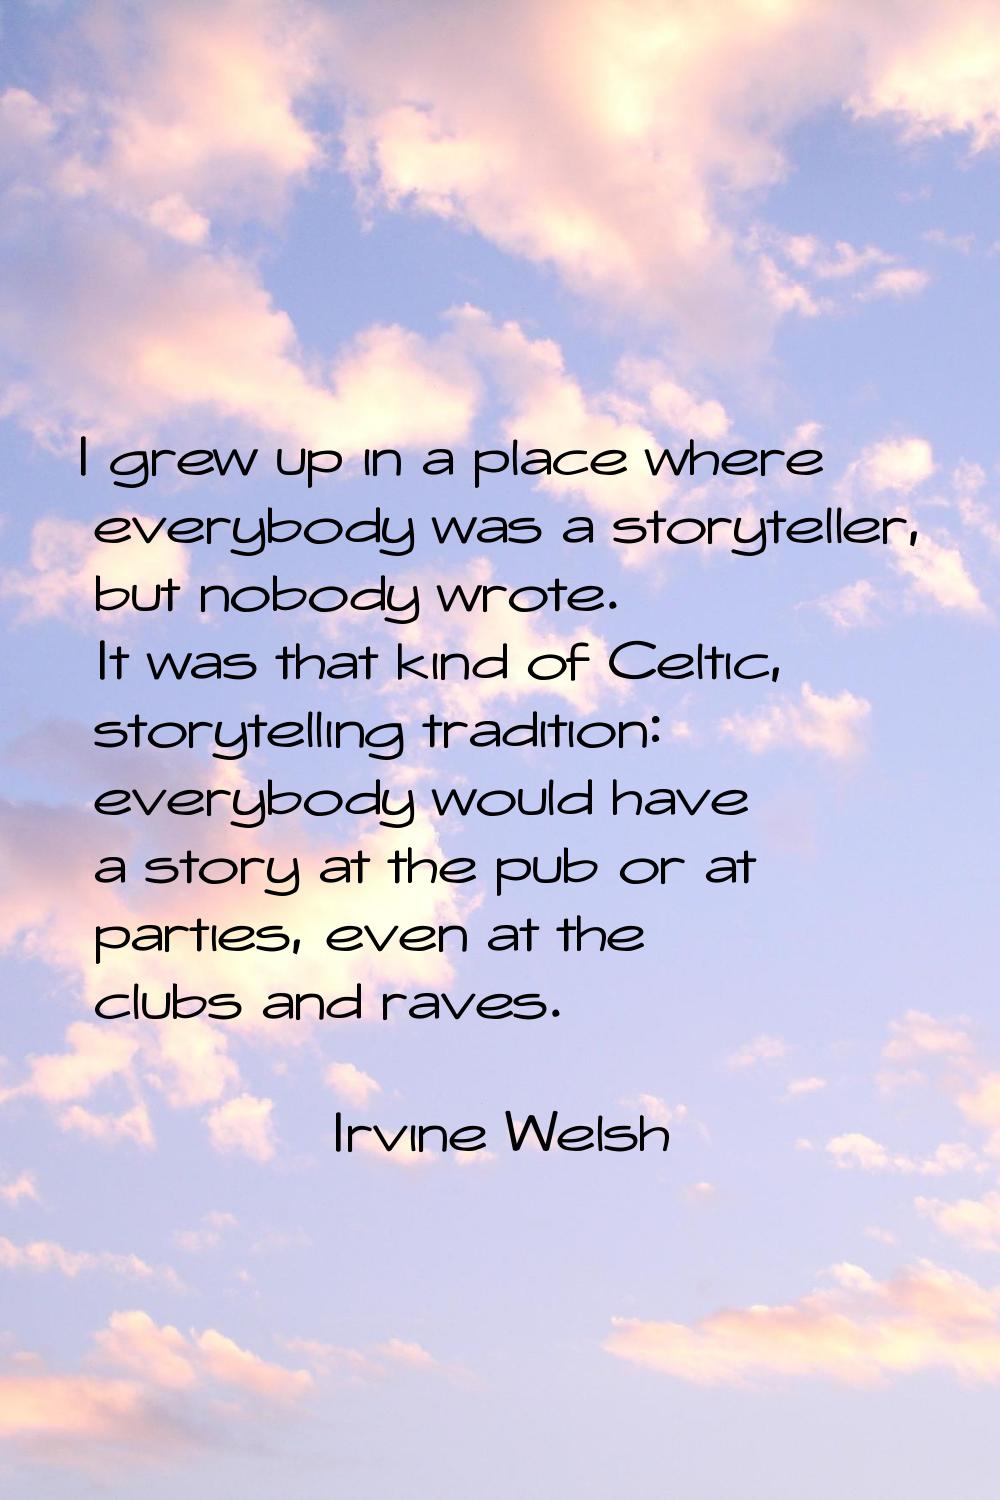 I grew up in a place where everybody was a storyteller, but nobody wrote. It was that kind of Celti